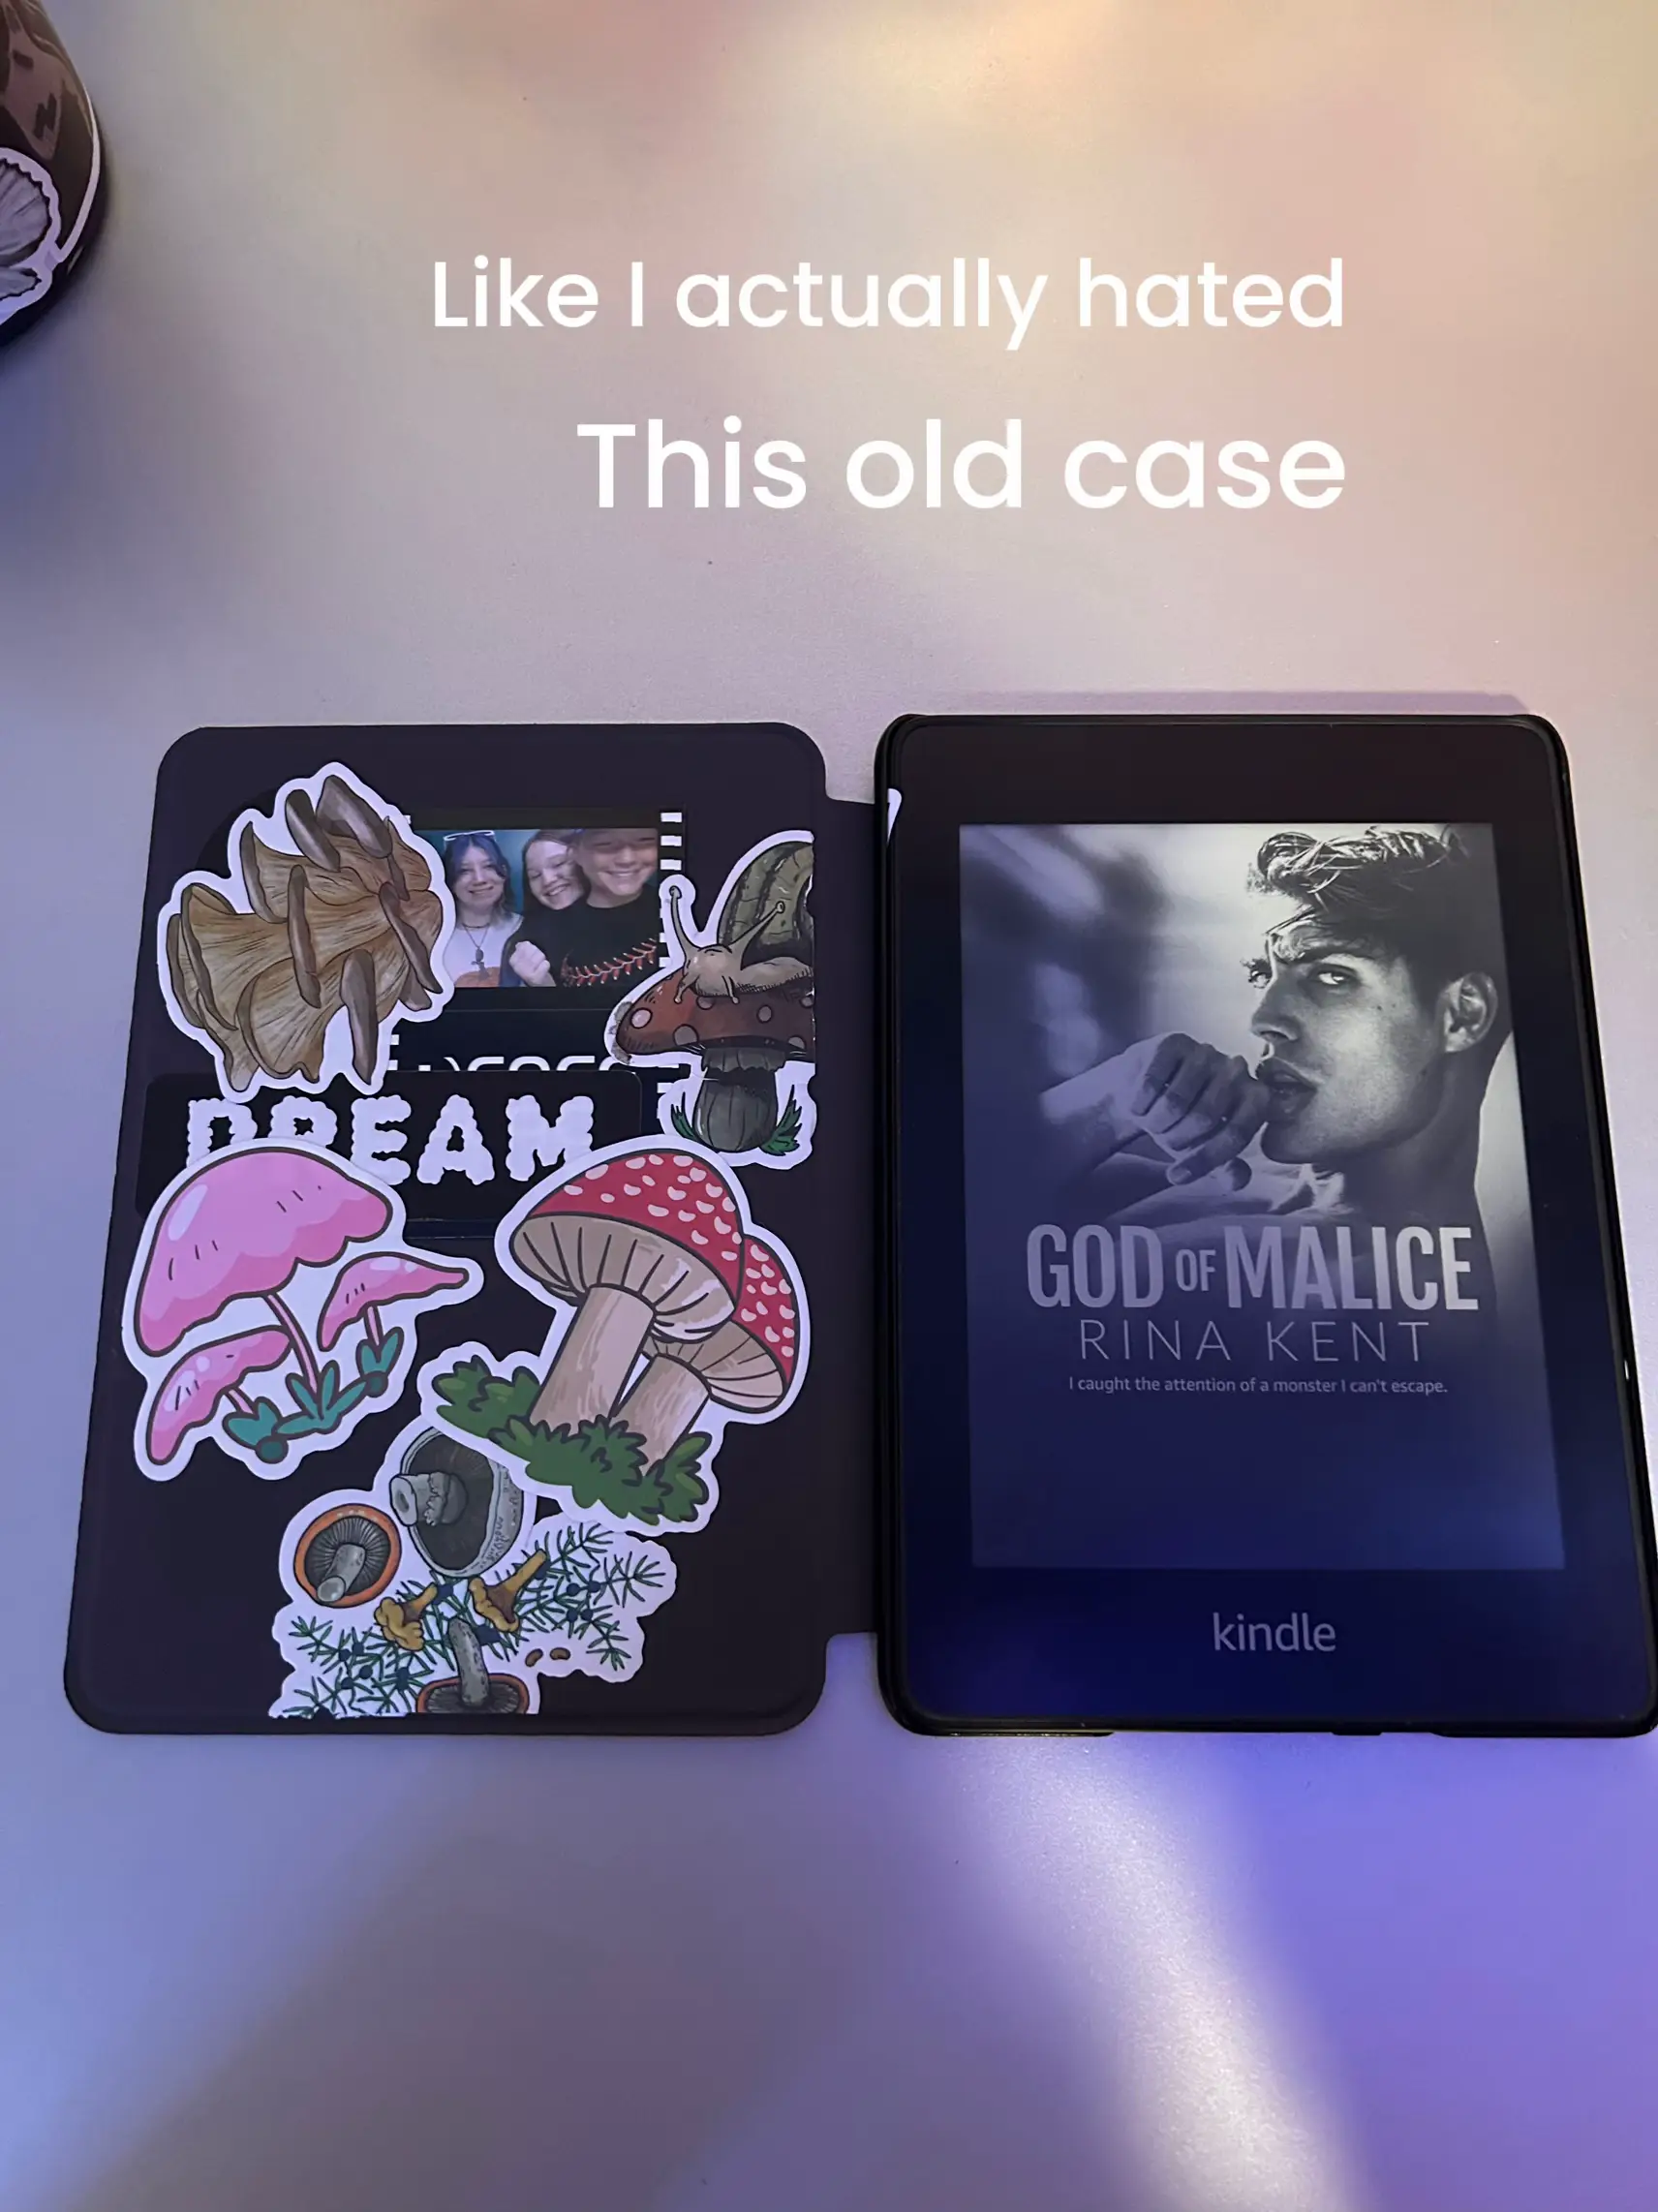 Anyone else sticker-bombed their kindle? 🥰 : r/kindle